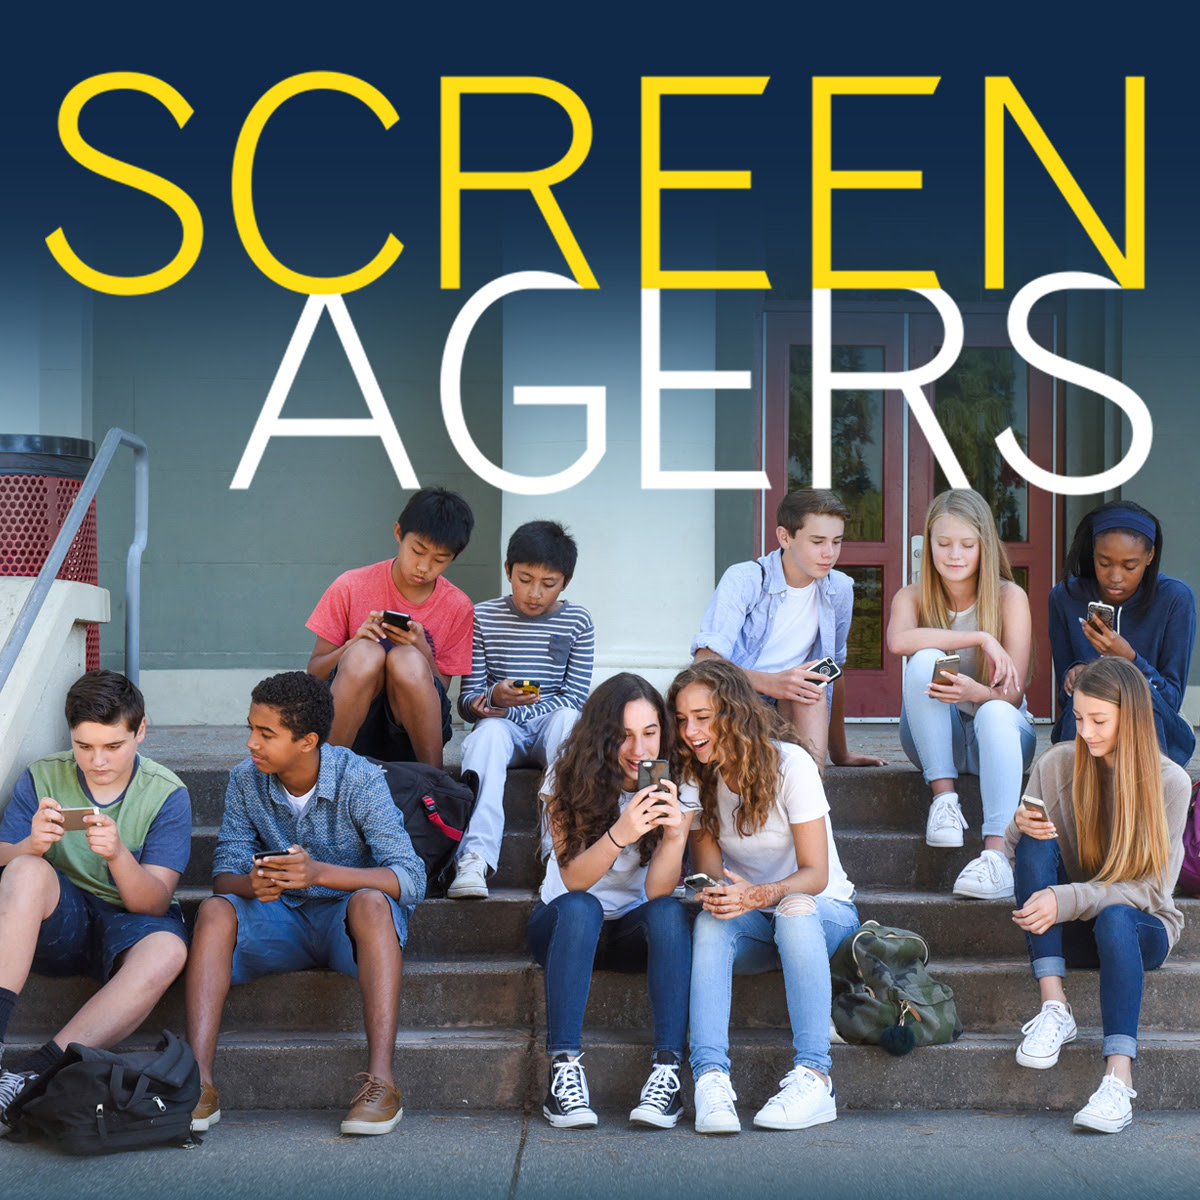 Screenagers Film Presented By Canyon Ridge Middle School PTA